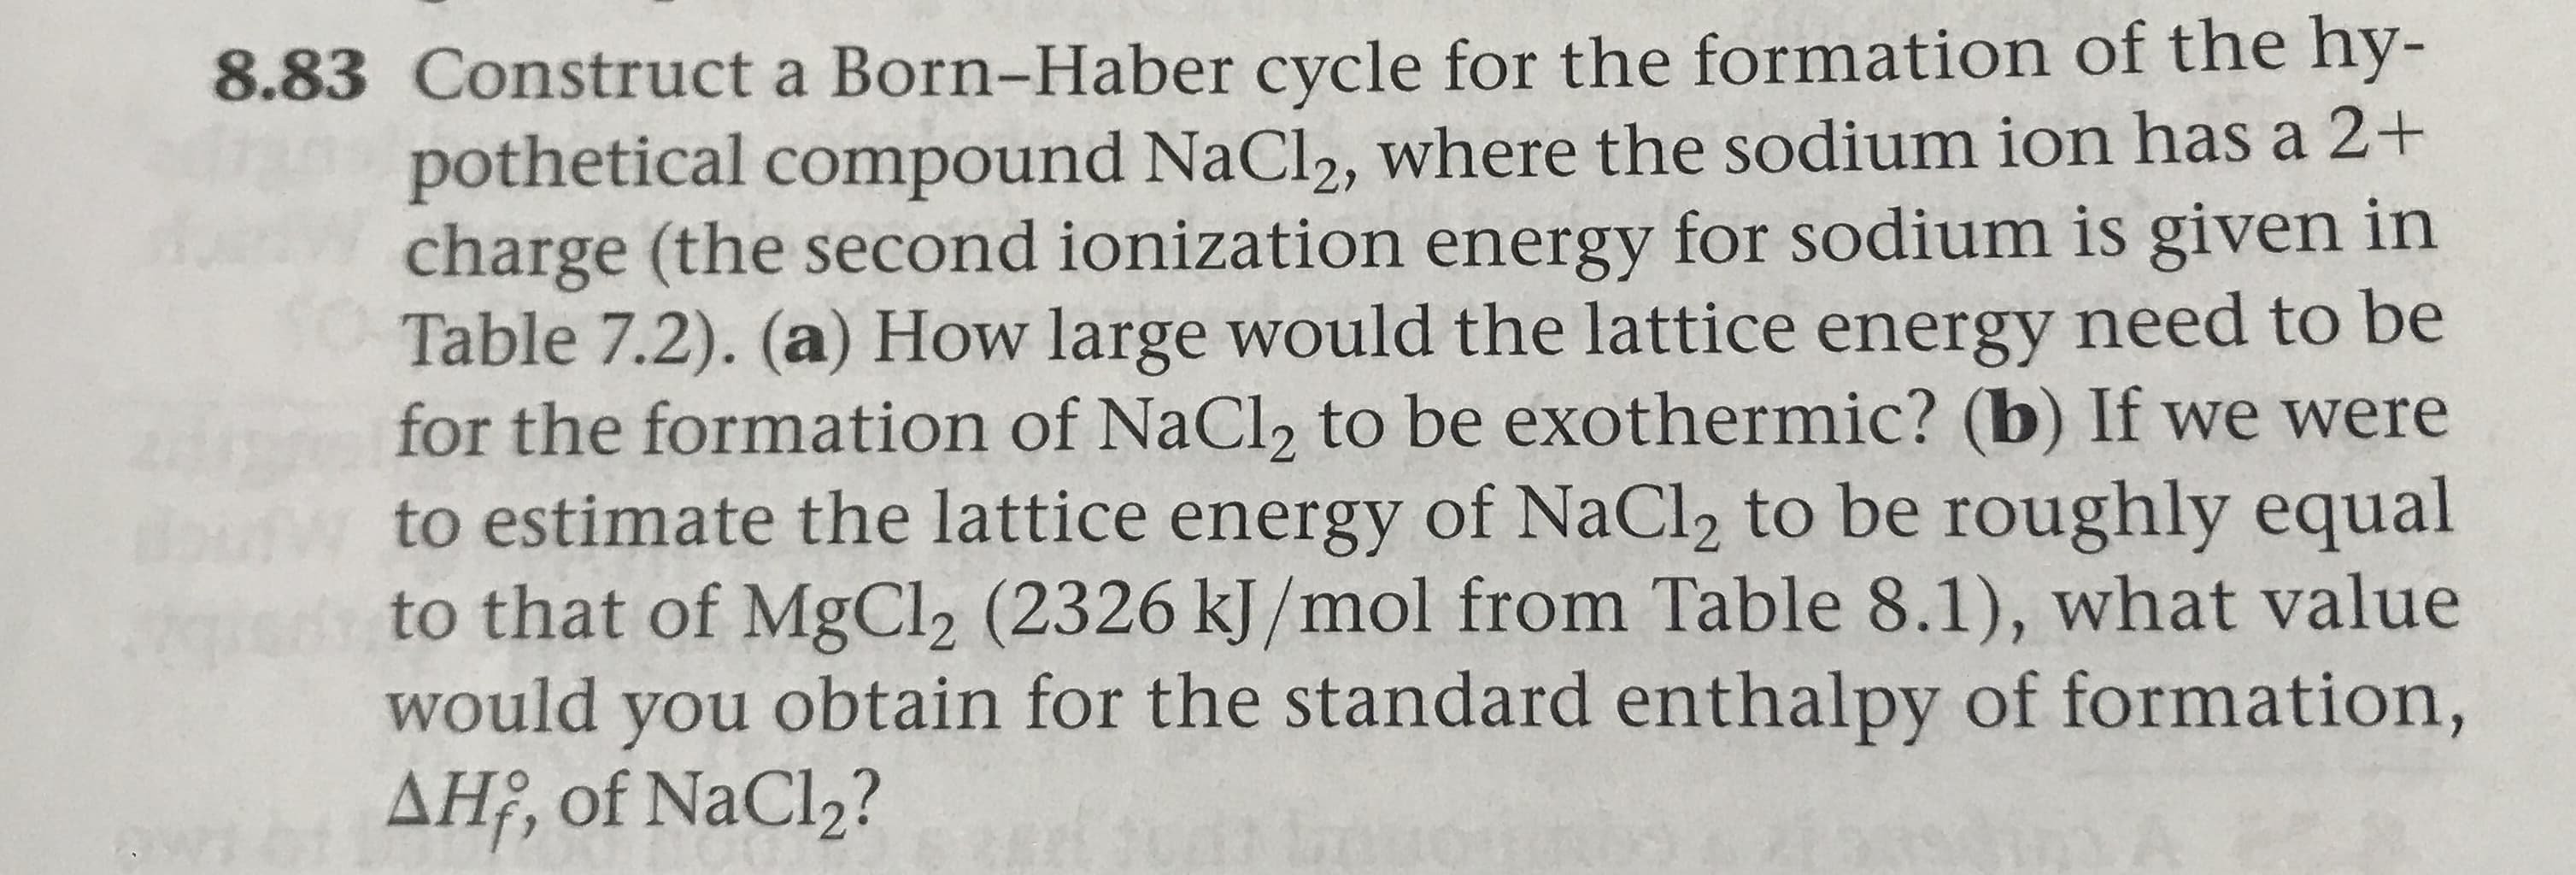 8.83 Construct a Born-Haber cycle for the formation of the hy-
pothetical compound NaCl2, where the sodium ion has a 2+
charge (the second ionization energy for sodium is given in
Table 7.2). (a) How large would the lattice energy need to be
for the formation of NaCl2 to be exothermic? (b) If we were
to estimate the lattice energy of NaCl2 to be roughly equal
to that of MgCl2 (2326 kJ/mol from Table 8.1), what value
would you obtain for the standard enthalpy of formation,
AH, of NaCl2?
